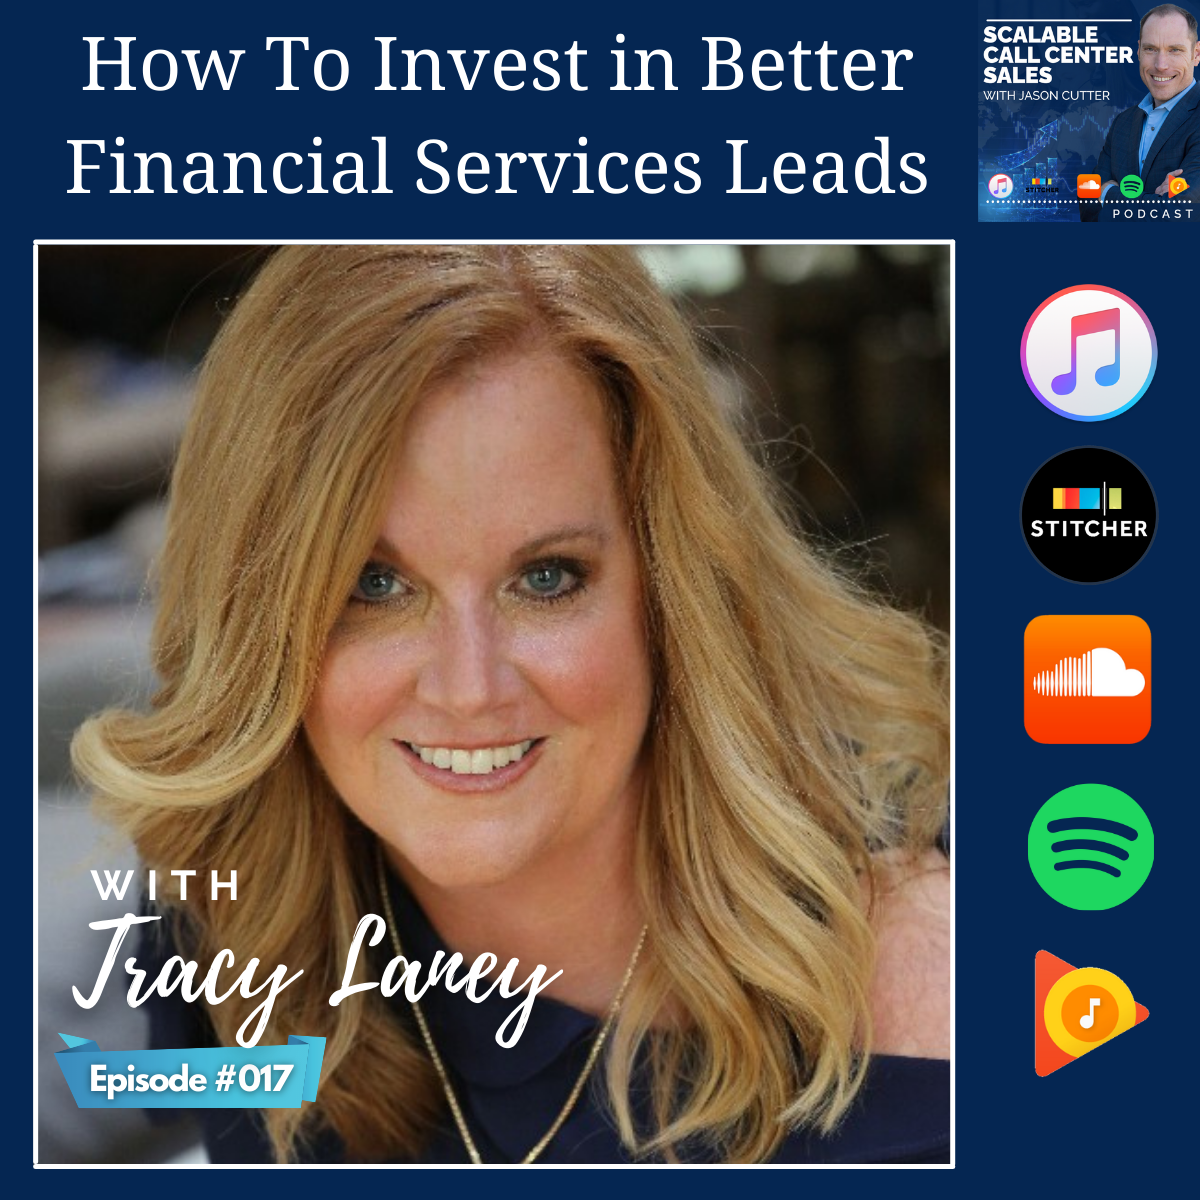 [017] How To Invest in Better Financial Services Leads, with Tracy Laney from Active Prospect